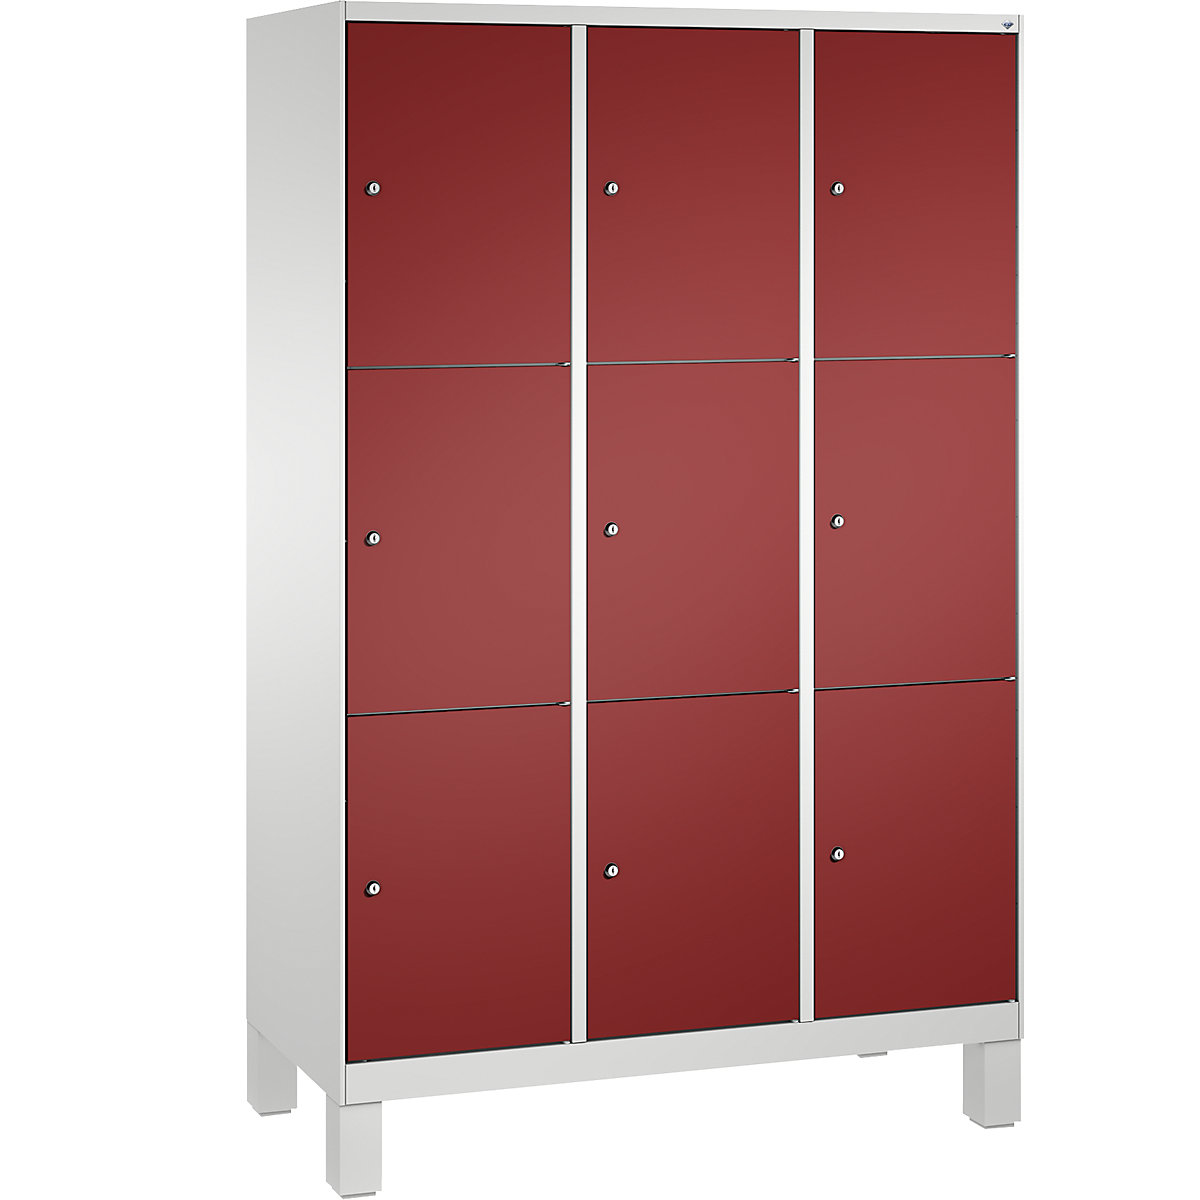 EVOLO locker unit, with feet – C+P, 3 compartments, 3 shelf compartments each, compartment width 400 mm, light grey / ruby red-16